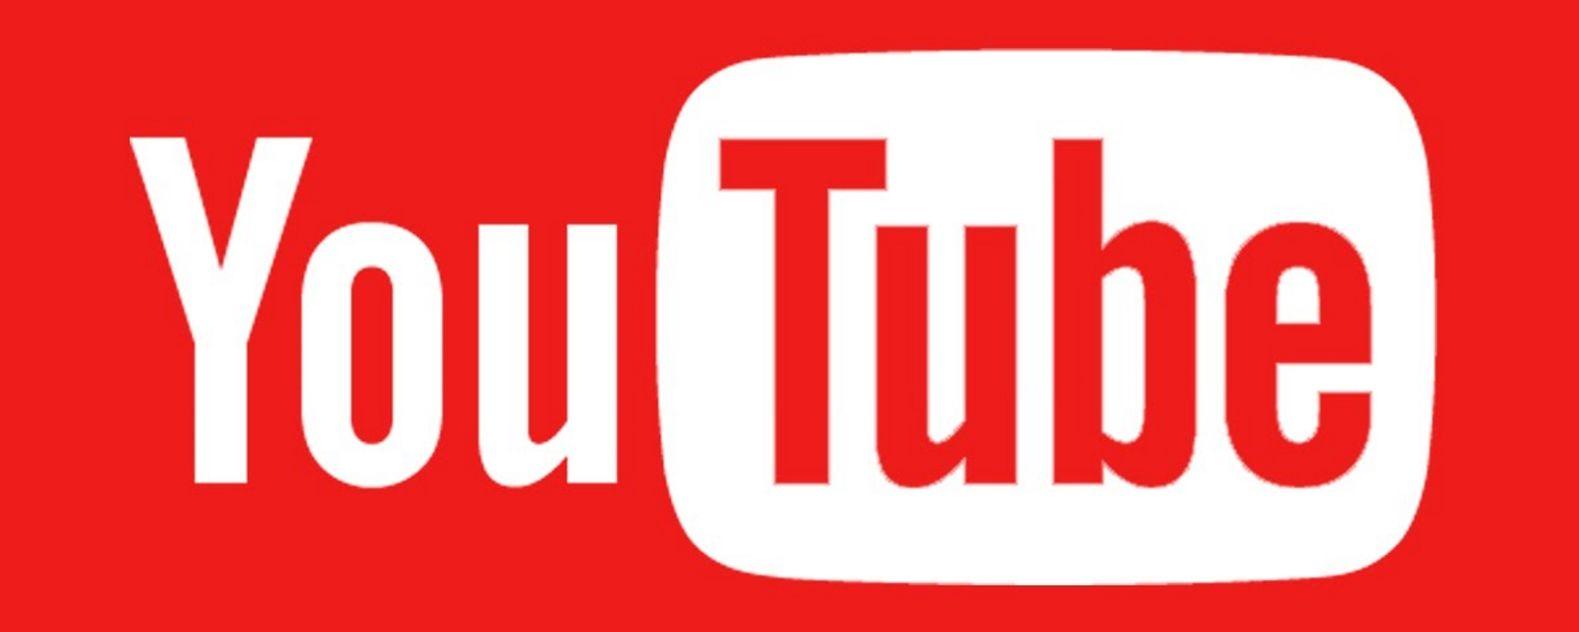 Funny YouTube Logo - The SteadyGo Funny Youtube Video Special Roundup - SteadyGo